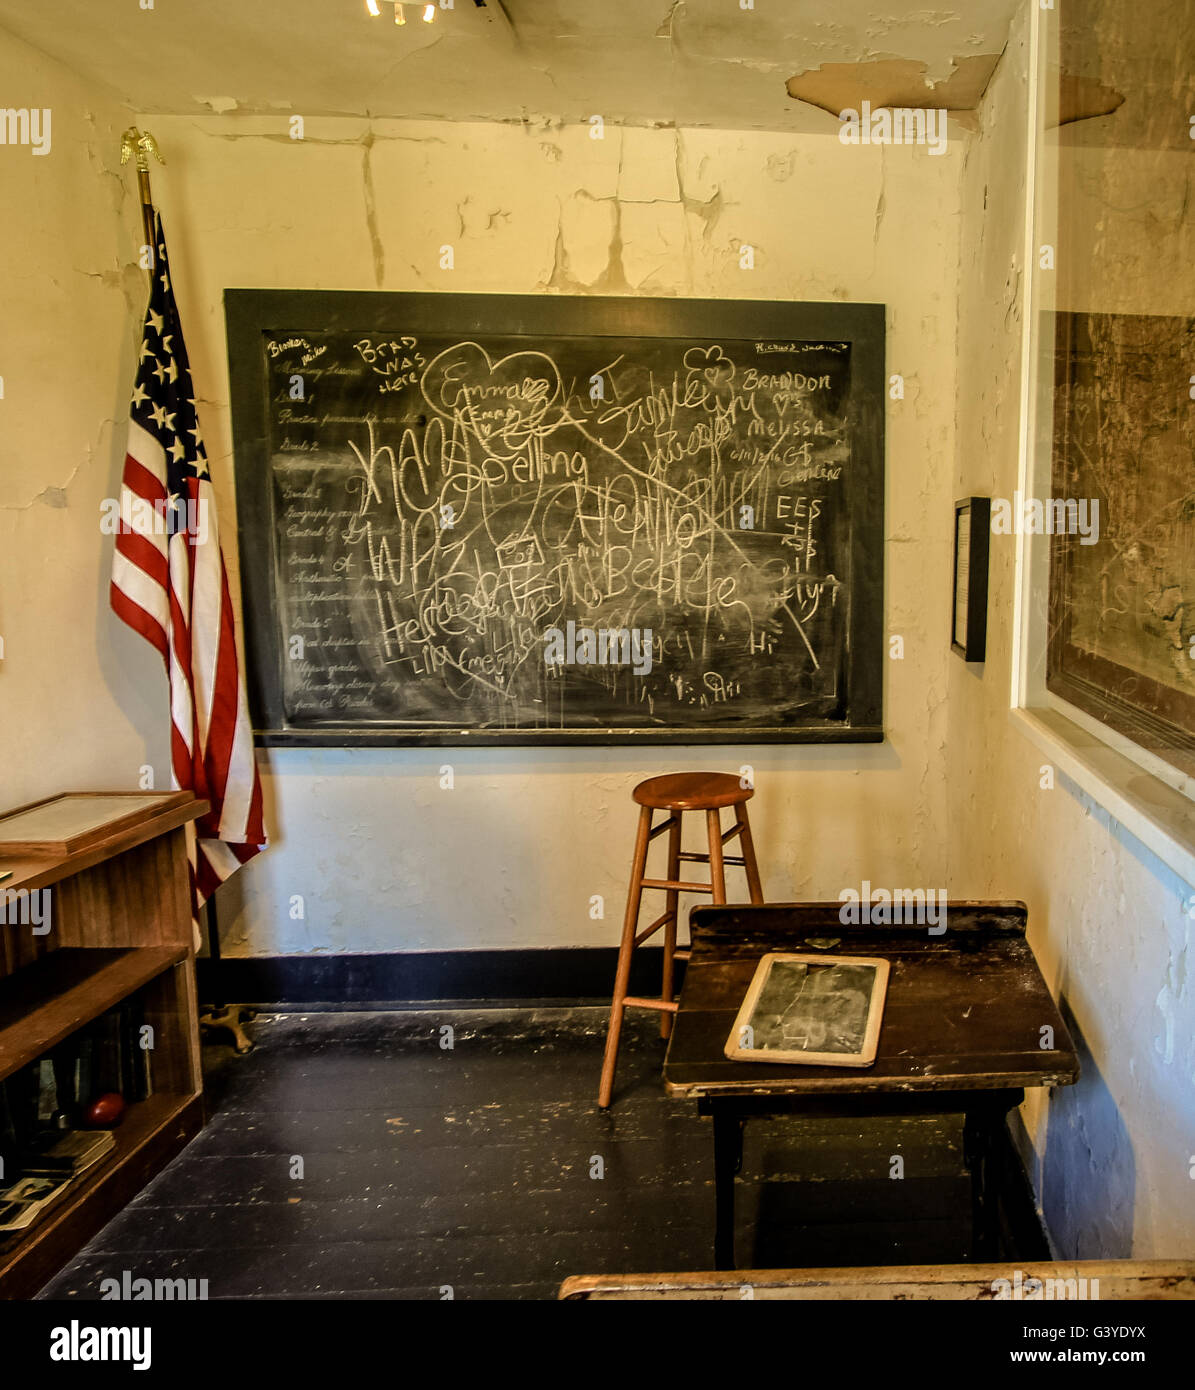 Garden, Michigan, USA- June 13, 2016: Empty one room schoolhouse display in the Fayette State Historical Park in the Upper Peninsula of Michigan. Stock Photo